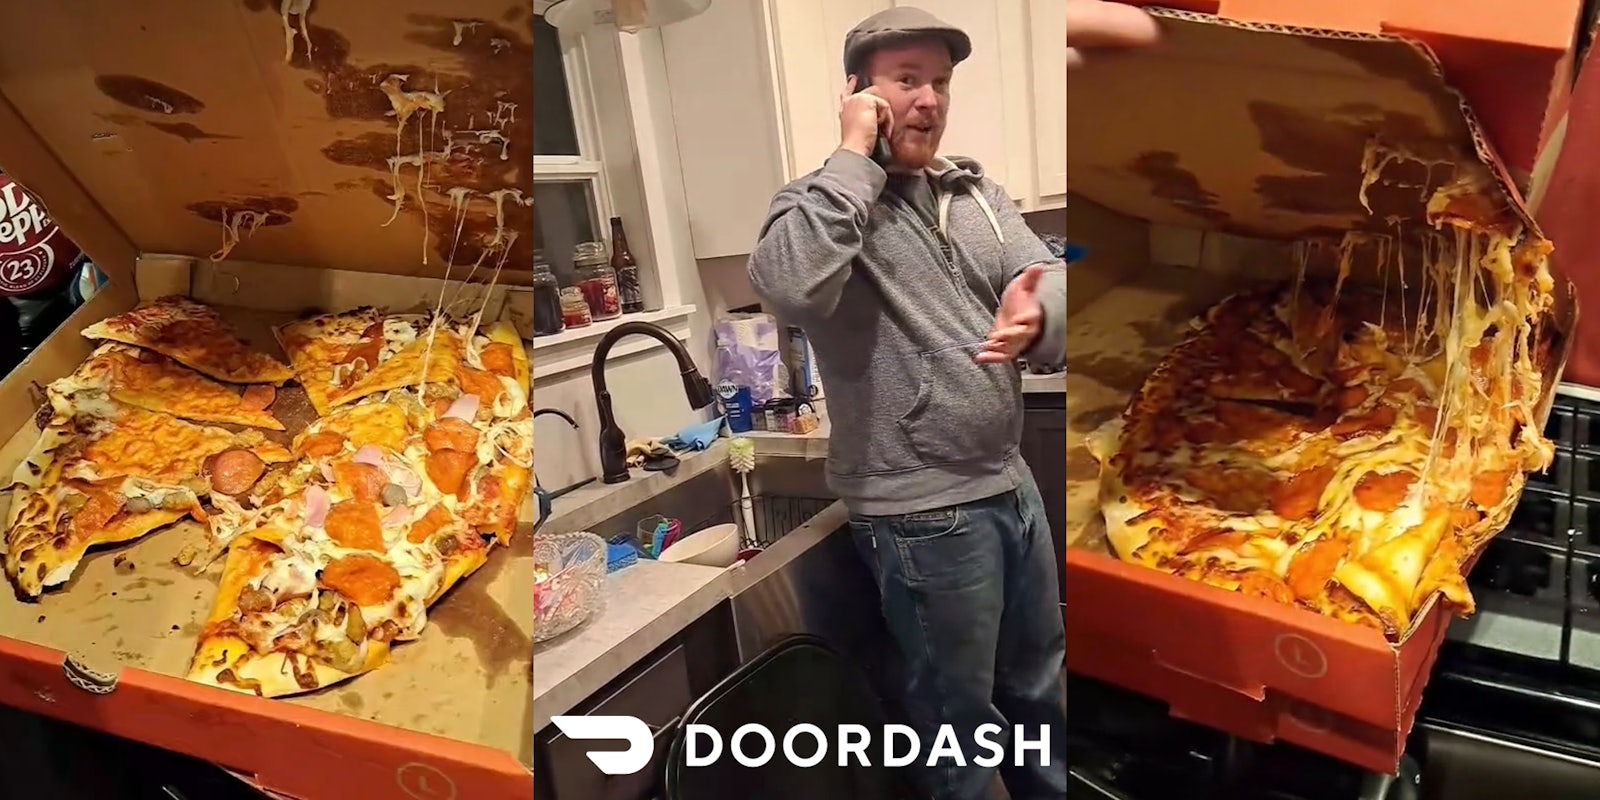 mangled pizza in box (l) man speaking in kitchen on phone with DoorDash logo at bottom (c) mangled pizza in box on top of stove (r)